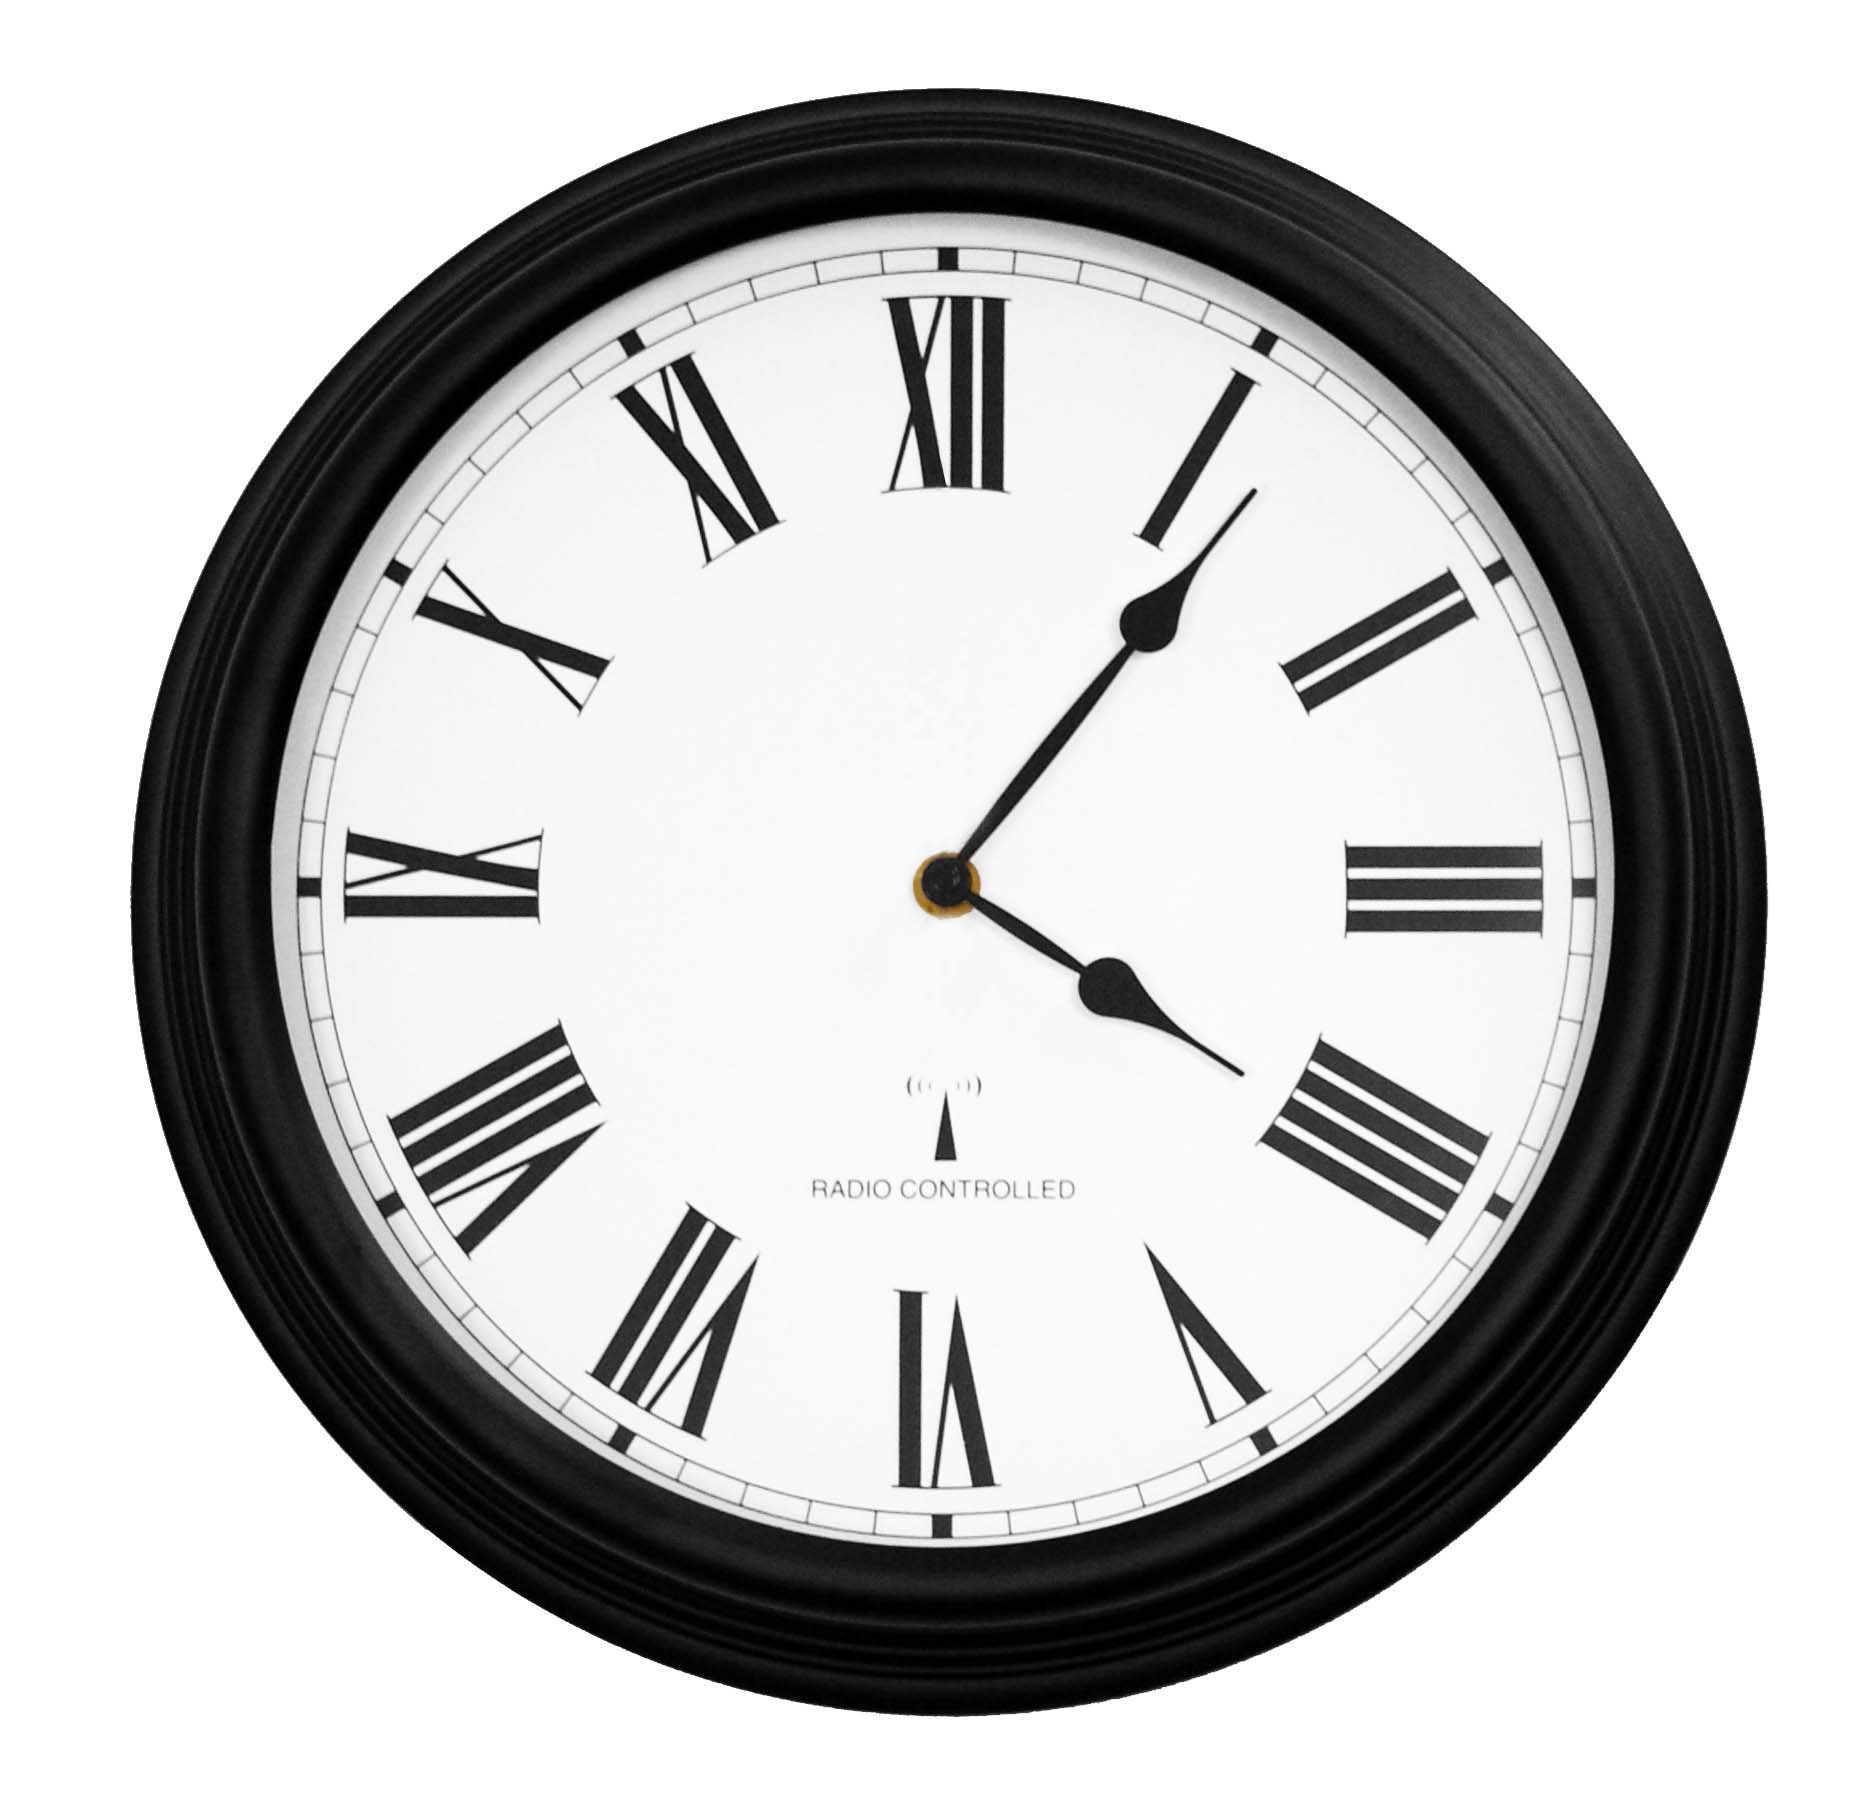 Perfect Time Radio Controlled Outdoor Garden Clock | Black | About Time™